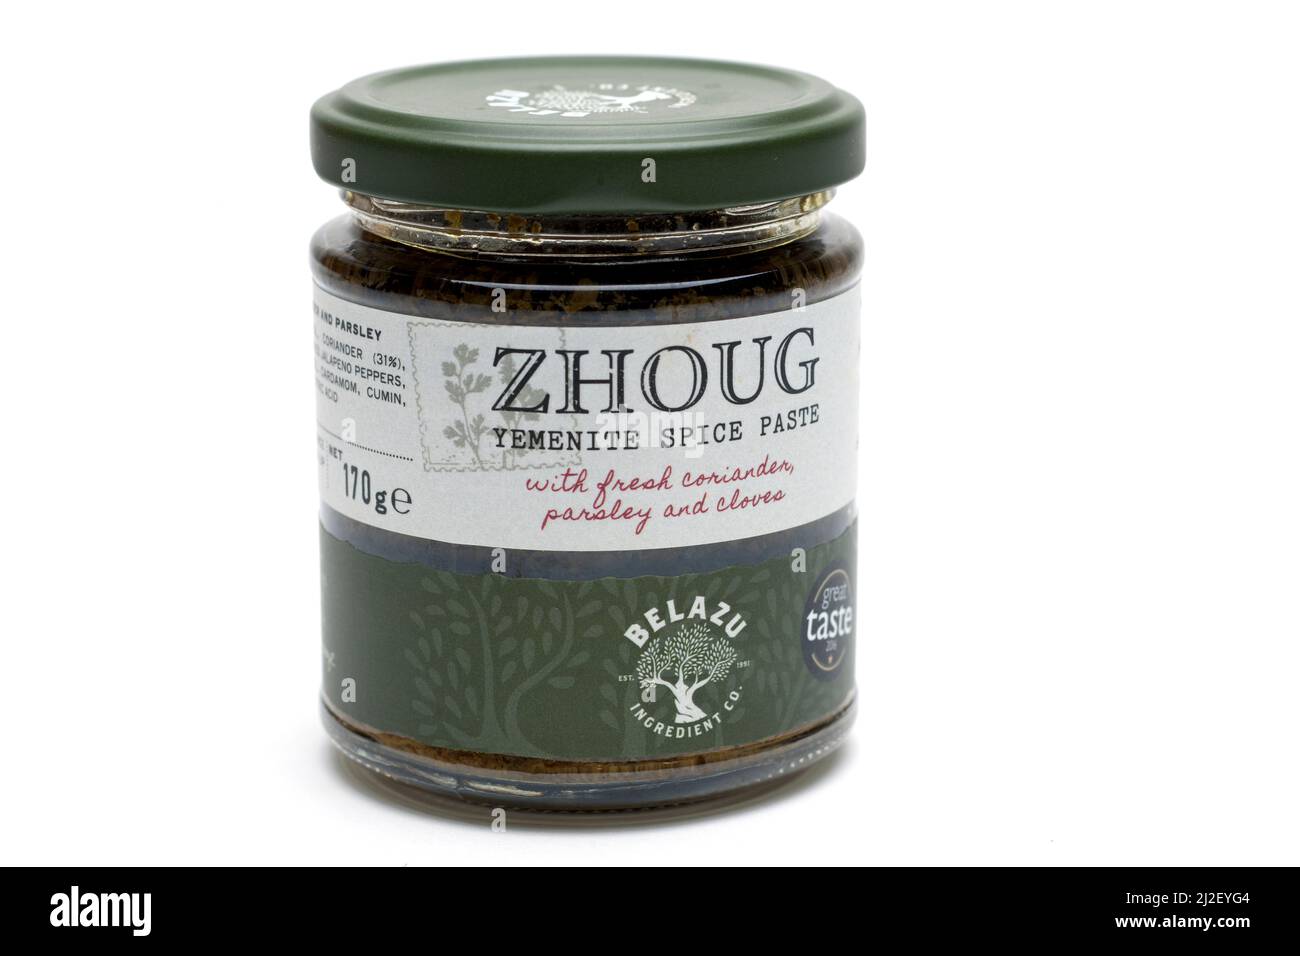 170 Jar of Zhoug Yemenite Spice Paste with Parsley  and Cloves Stock Photo